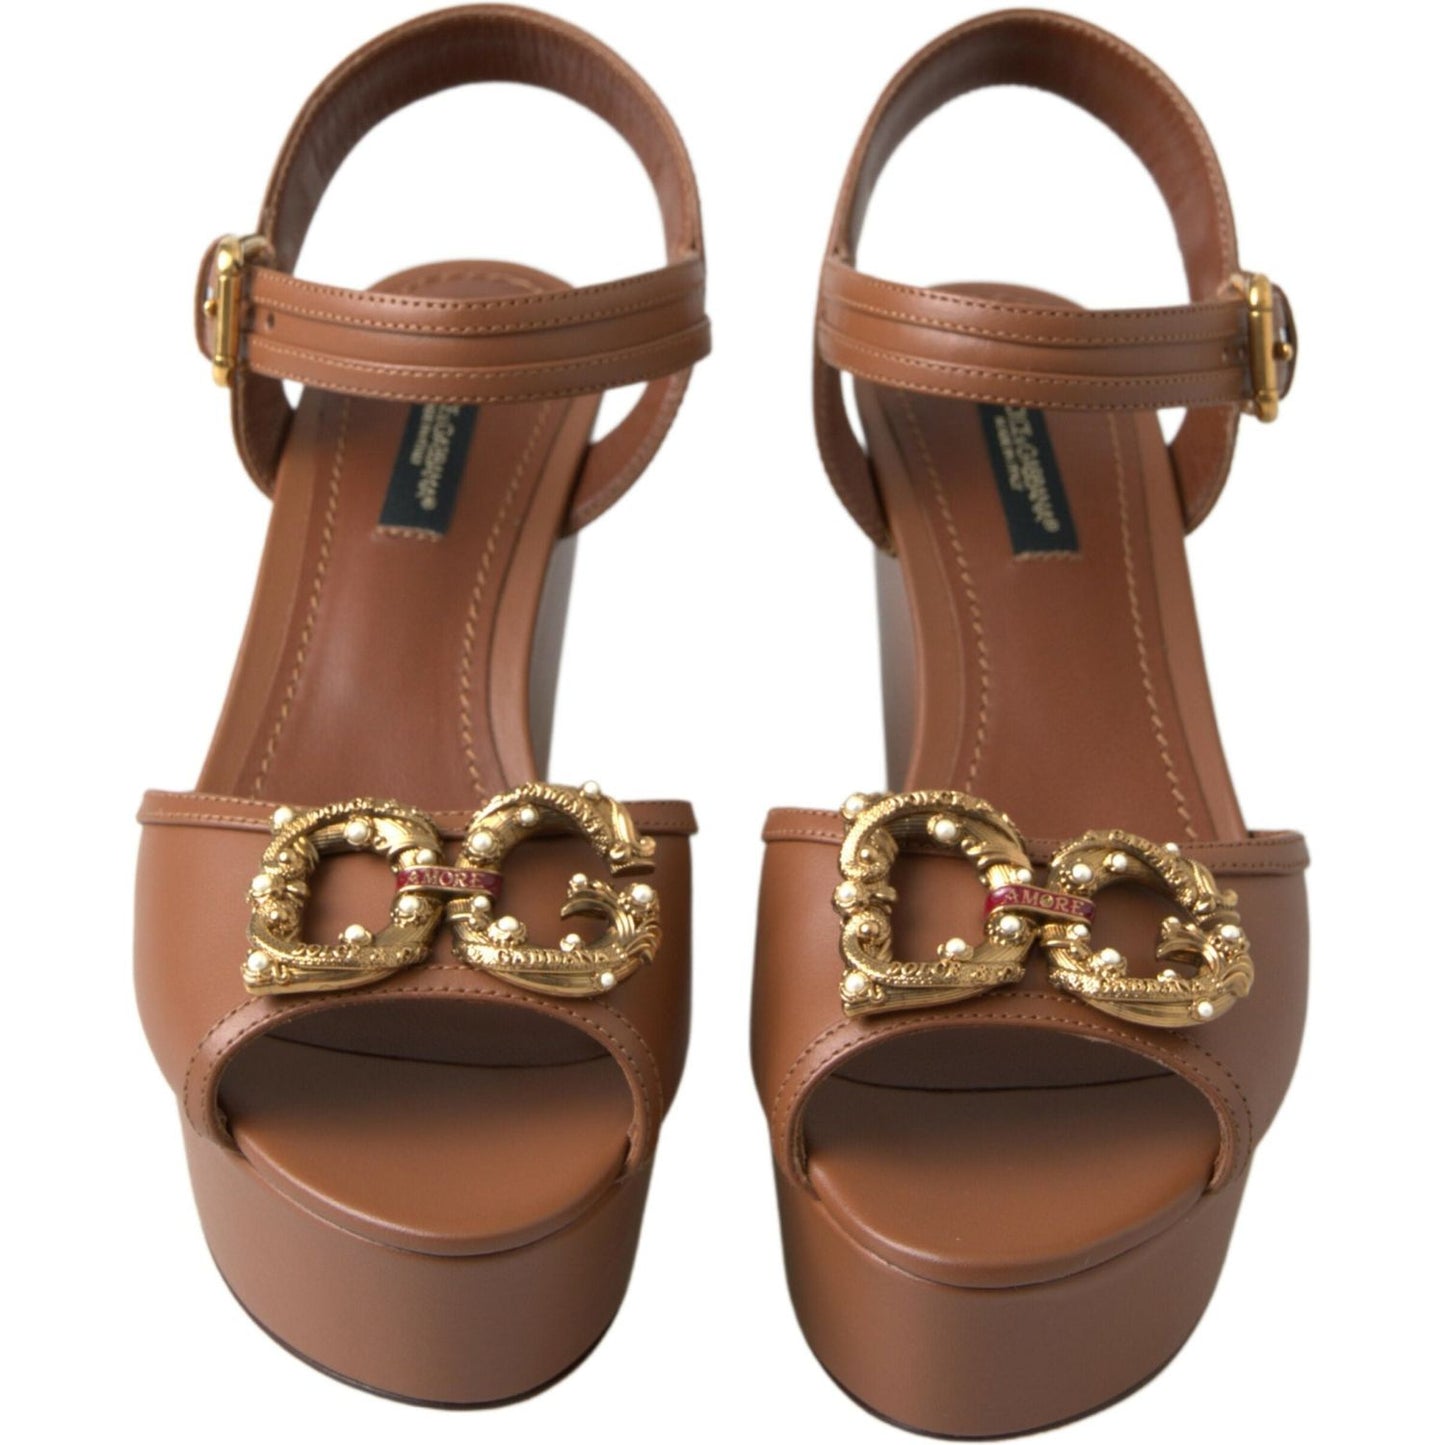 Dolce & Gabbana Chic Brown Leather Ankle Strap Wedges brown-leather-amore-wedges-sandals-shoes 465A0047-scaled-a1d0989f-cfe.jpg